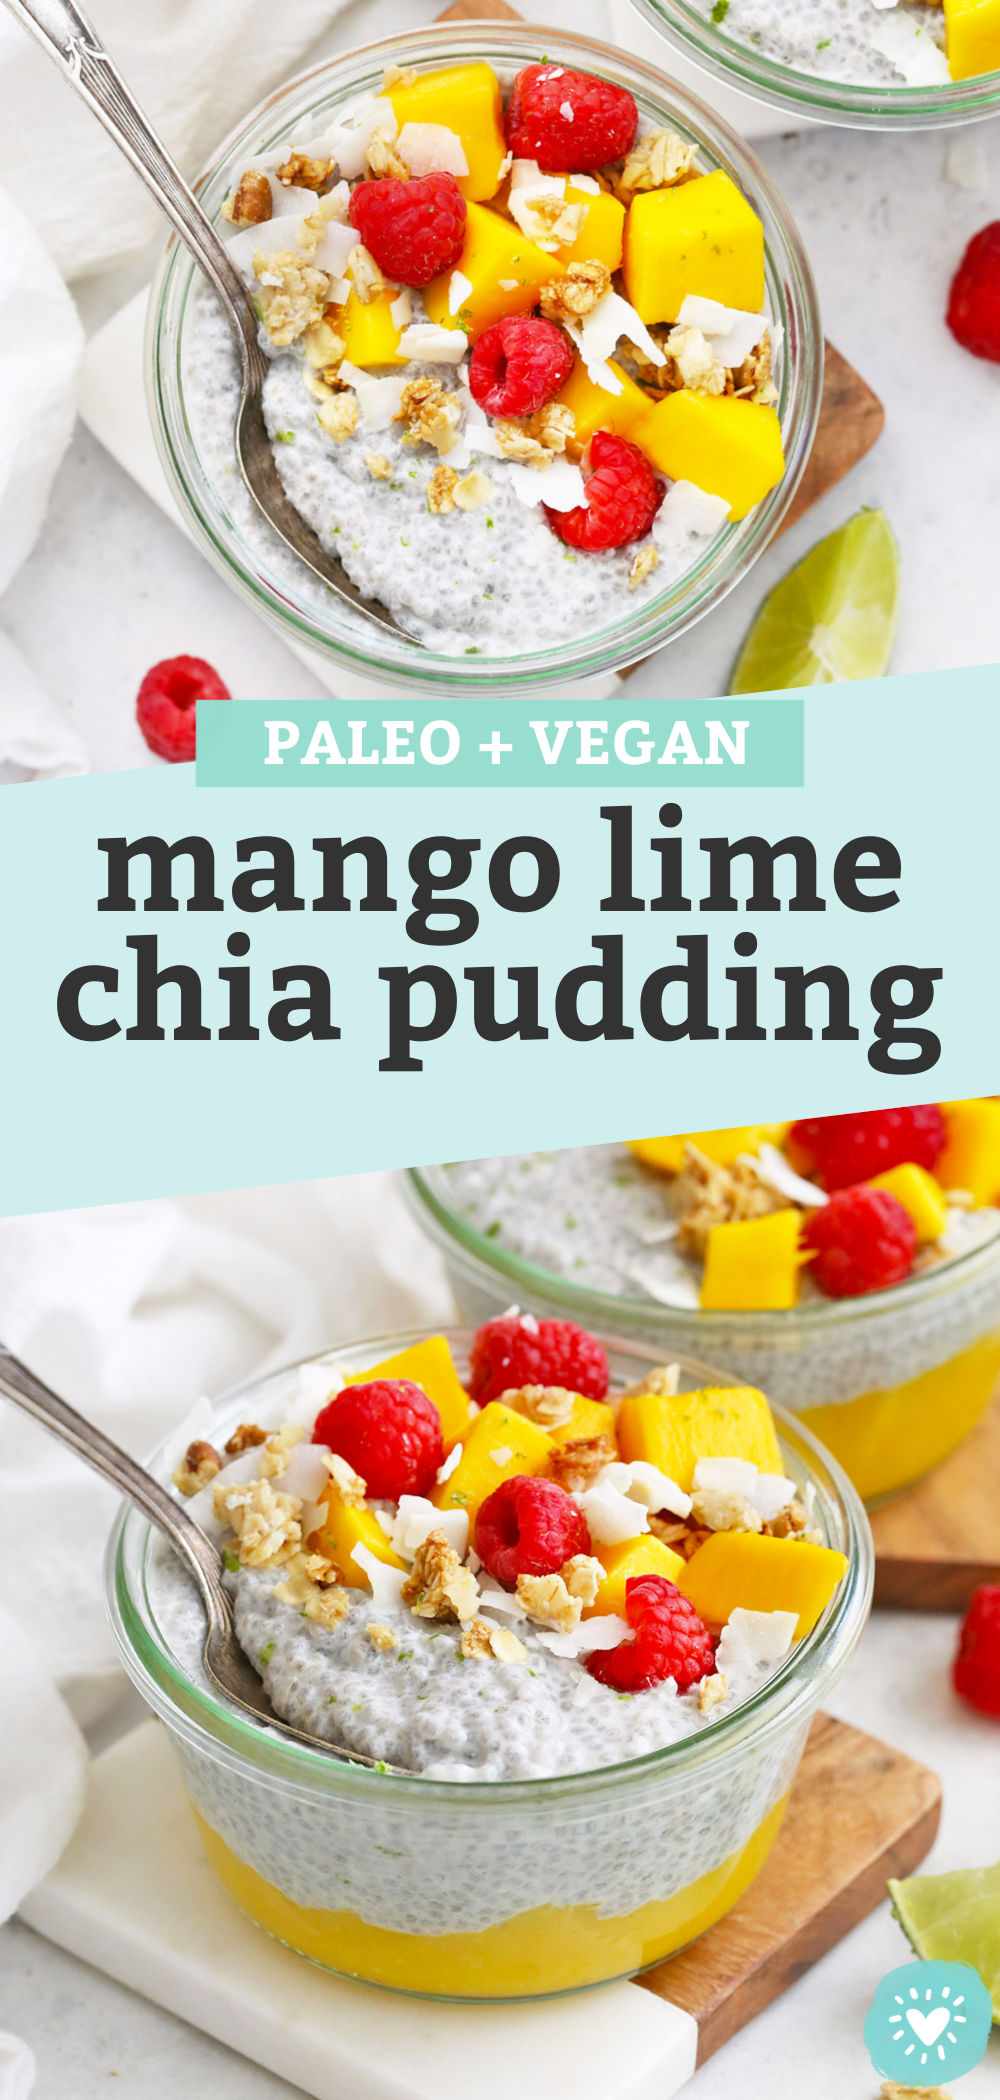 Collage of images of mango chia pudding in jars with text that reads "Paleo + Vegan Mango Lime Chia Pudding"